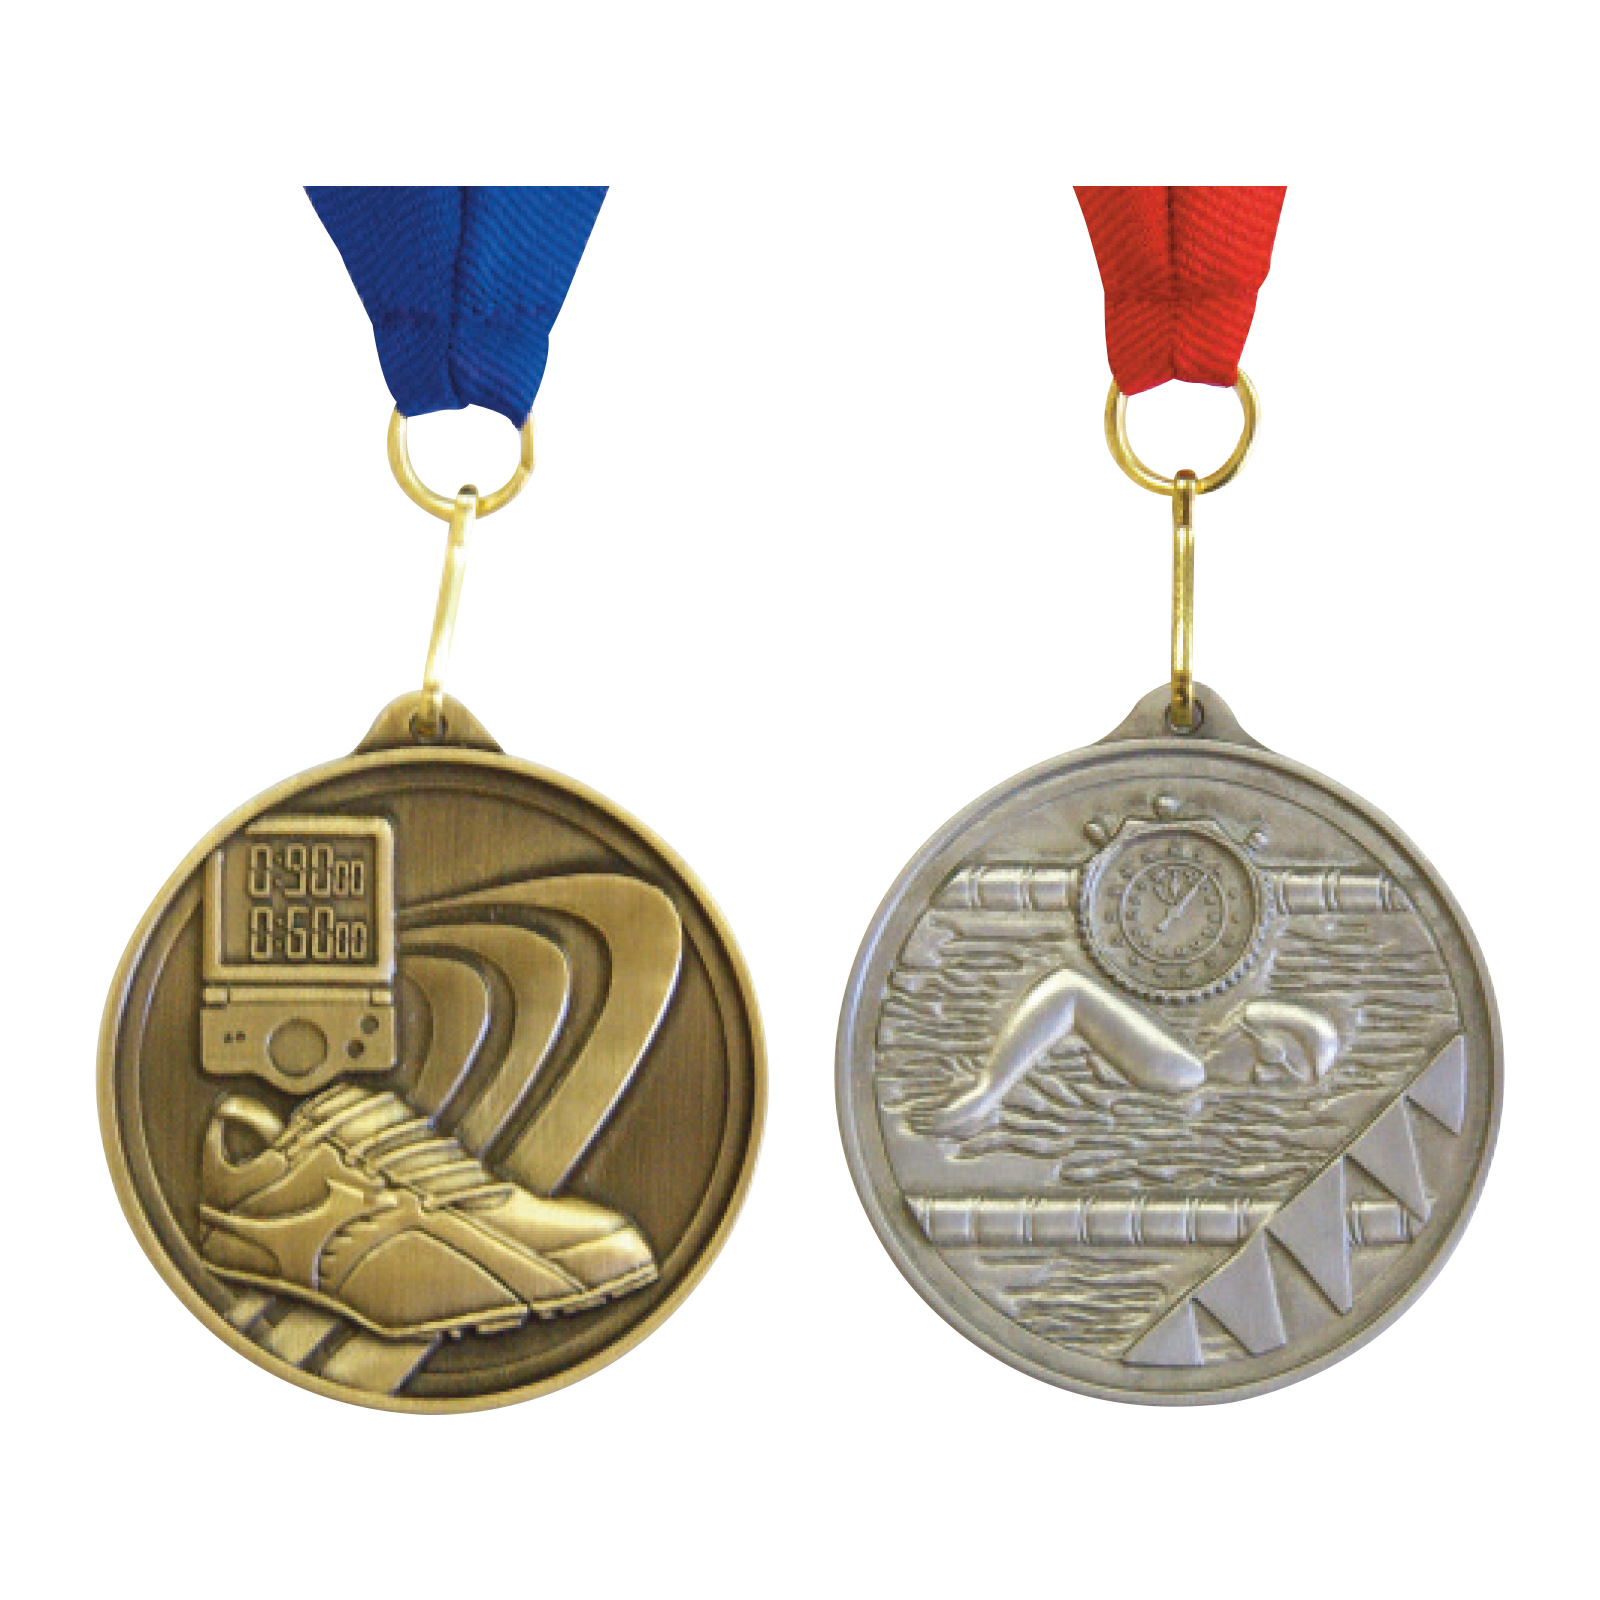 Deluxe 3D Medallions with Ribbon